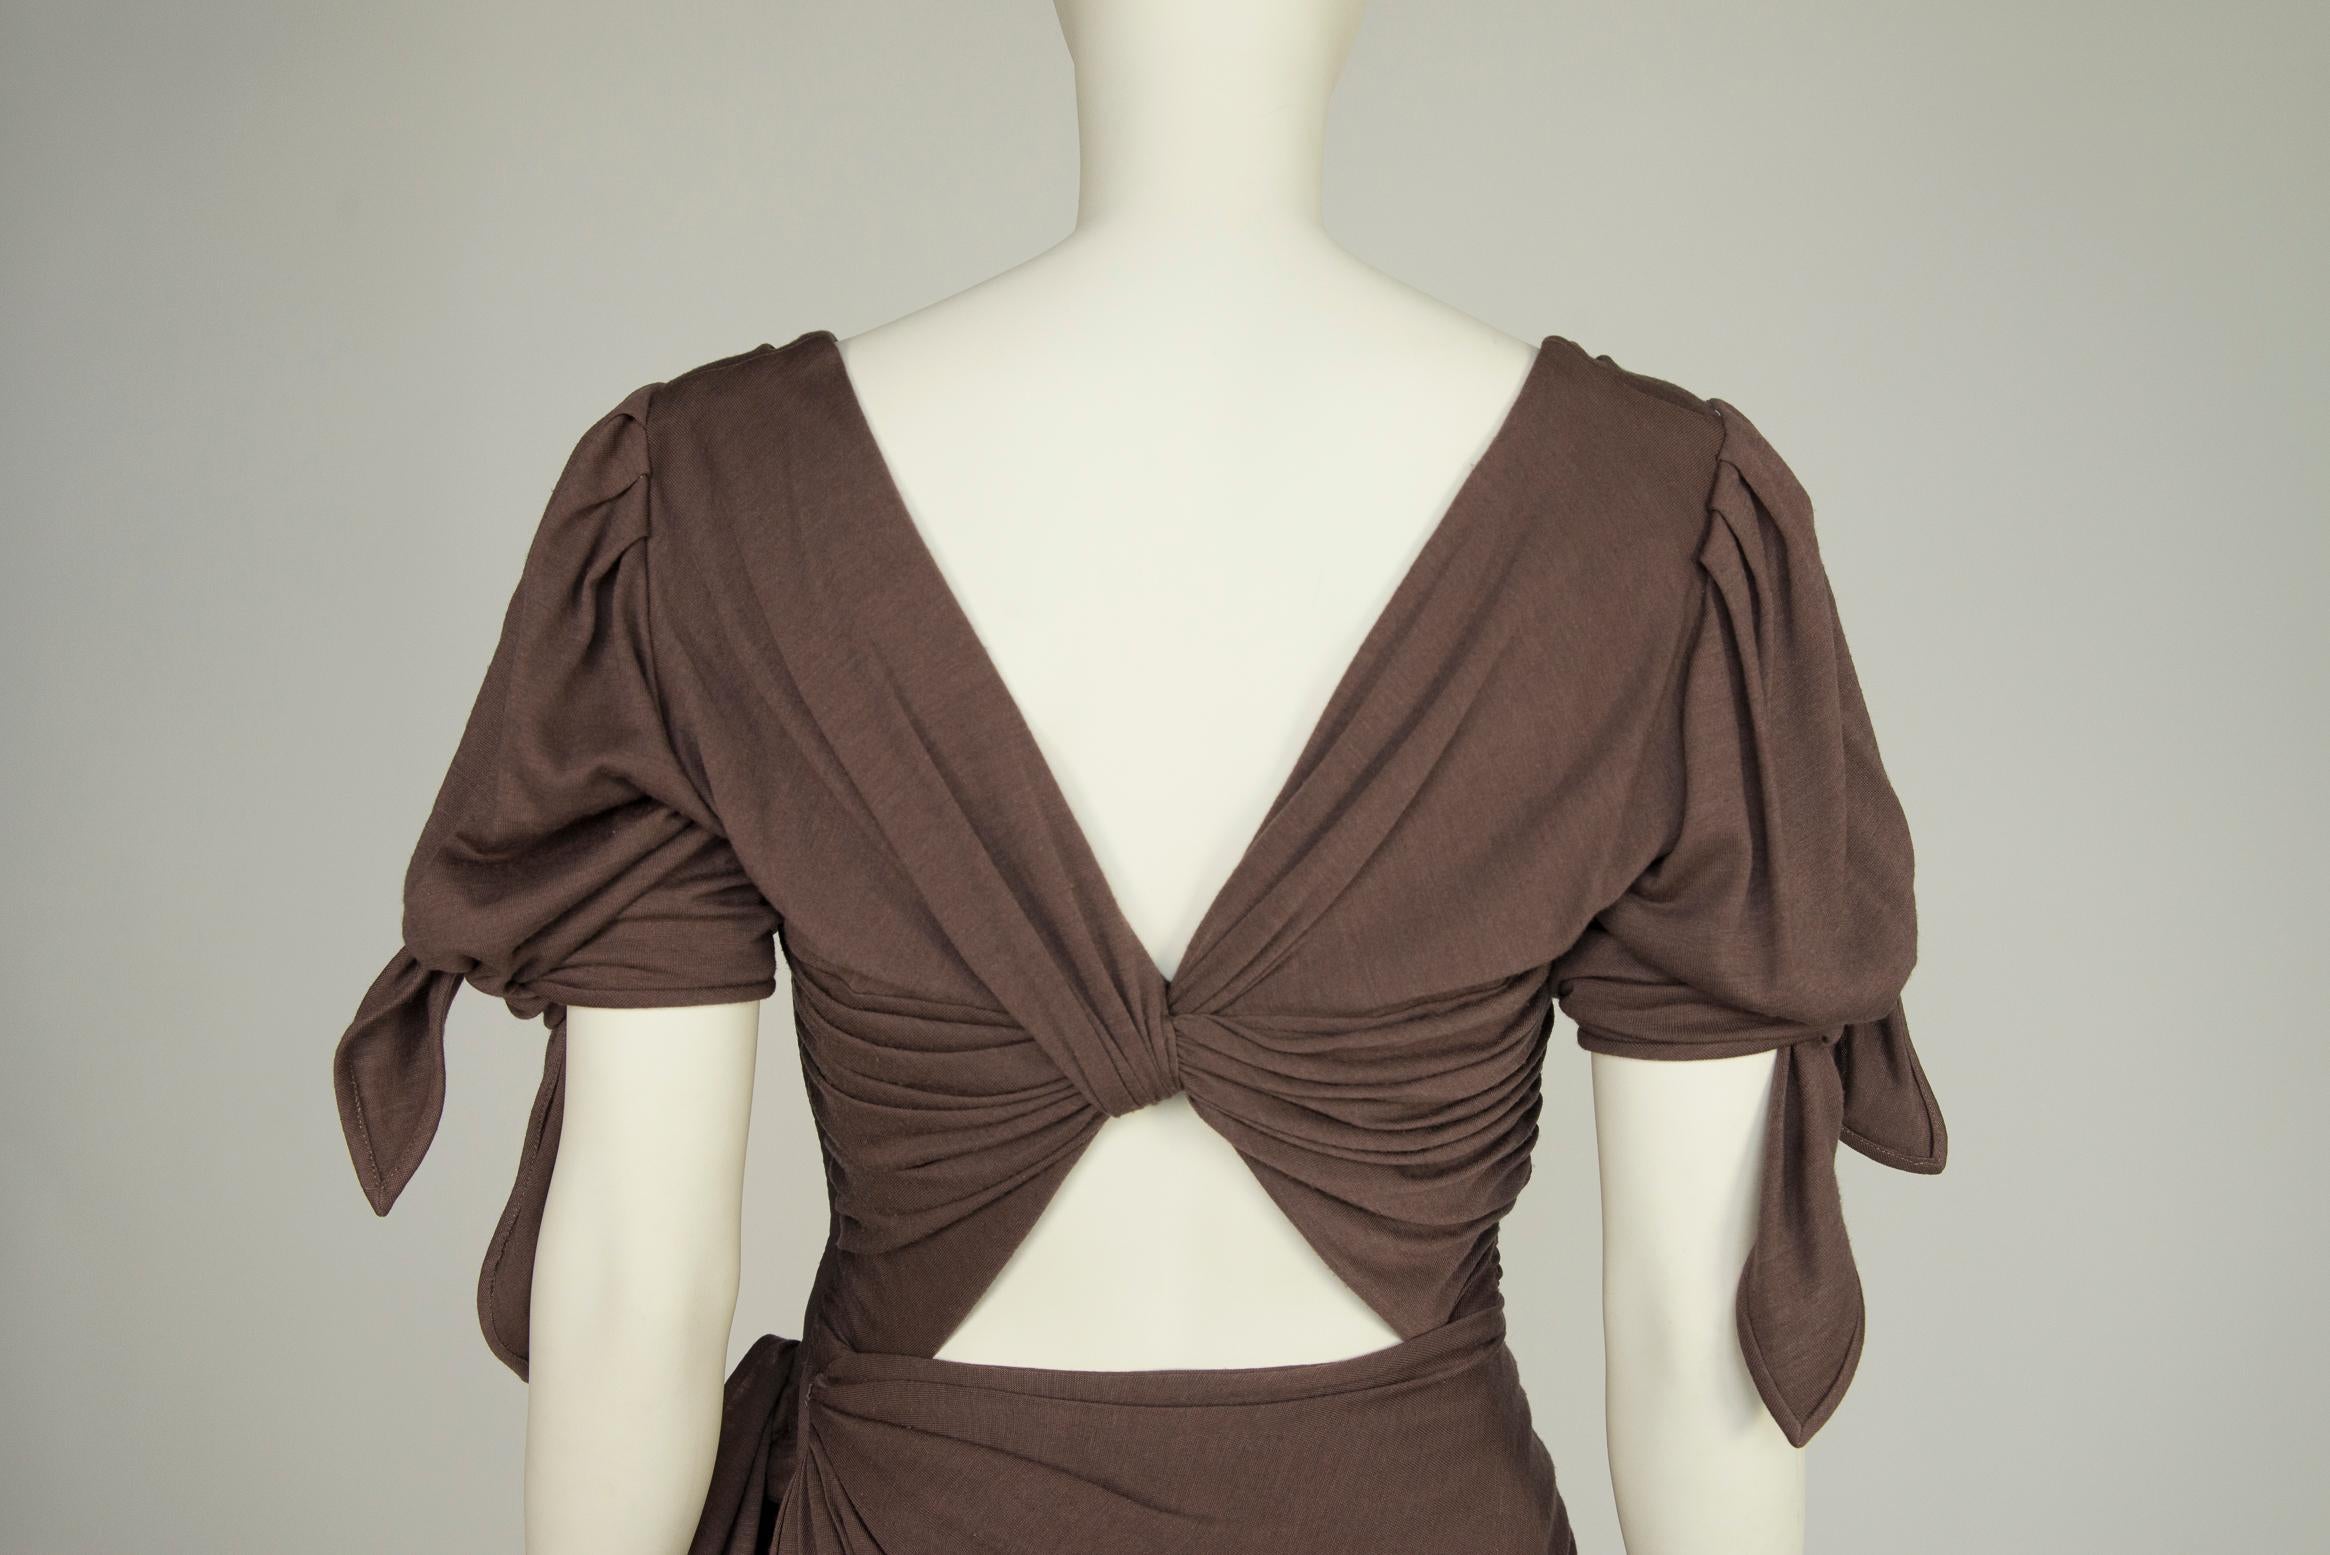 Emanuel Ungaro Draped Knotted Cut-Out Cocktail Dress, Circa 1985 For Sale 5